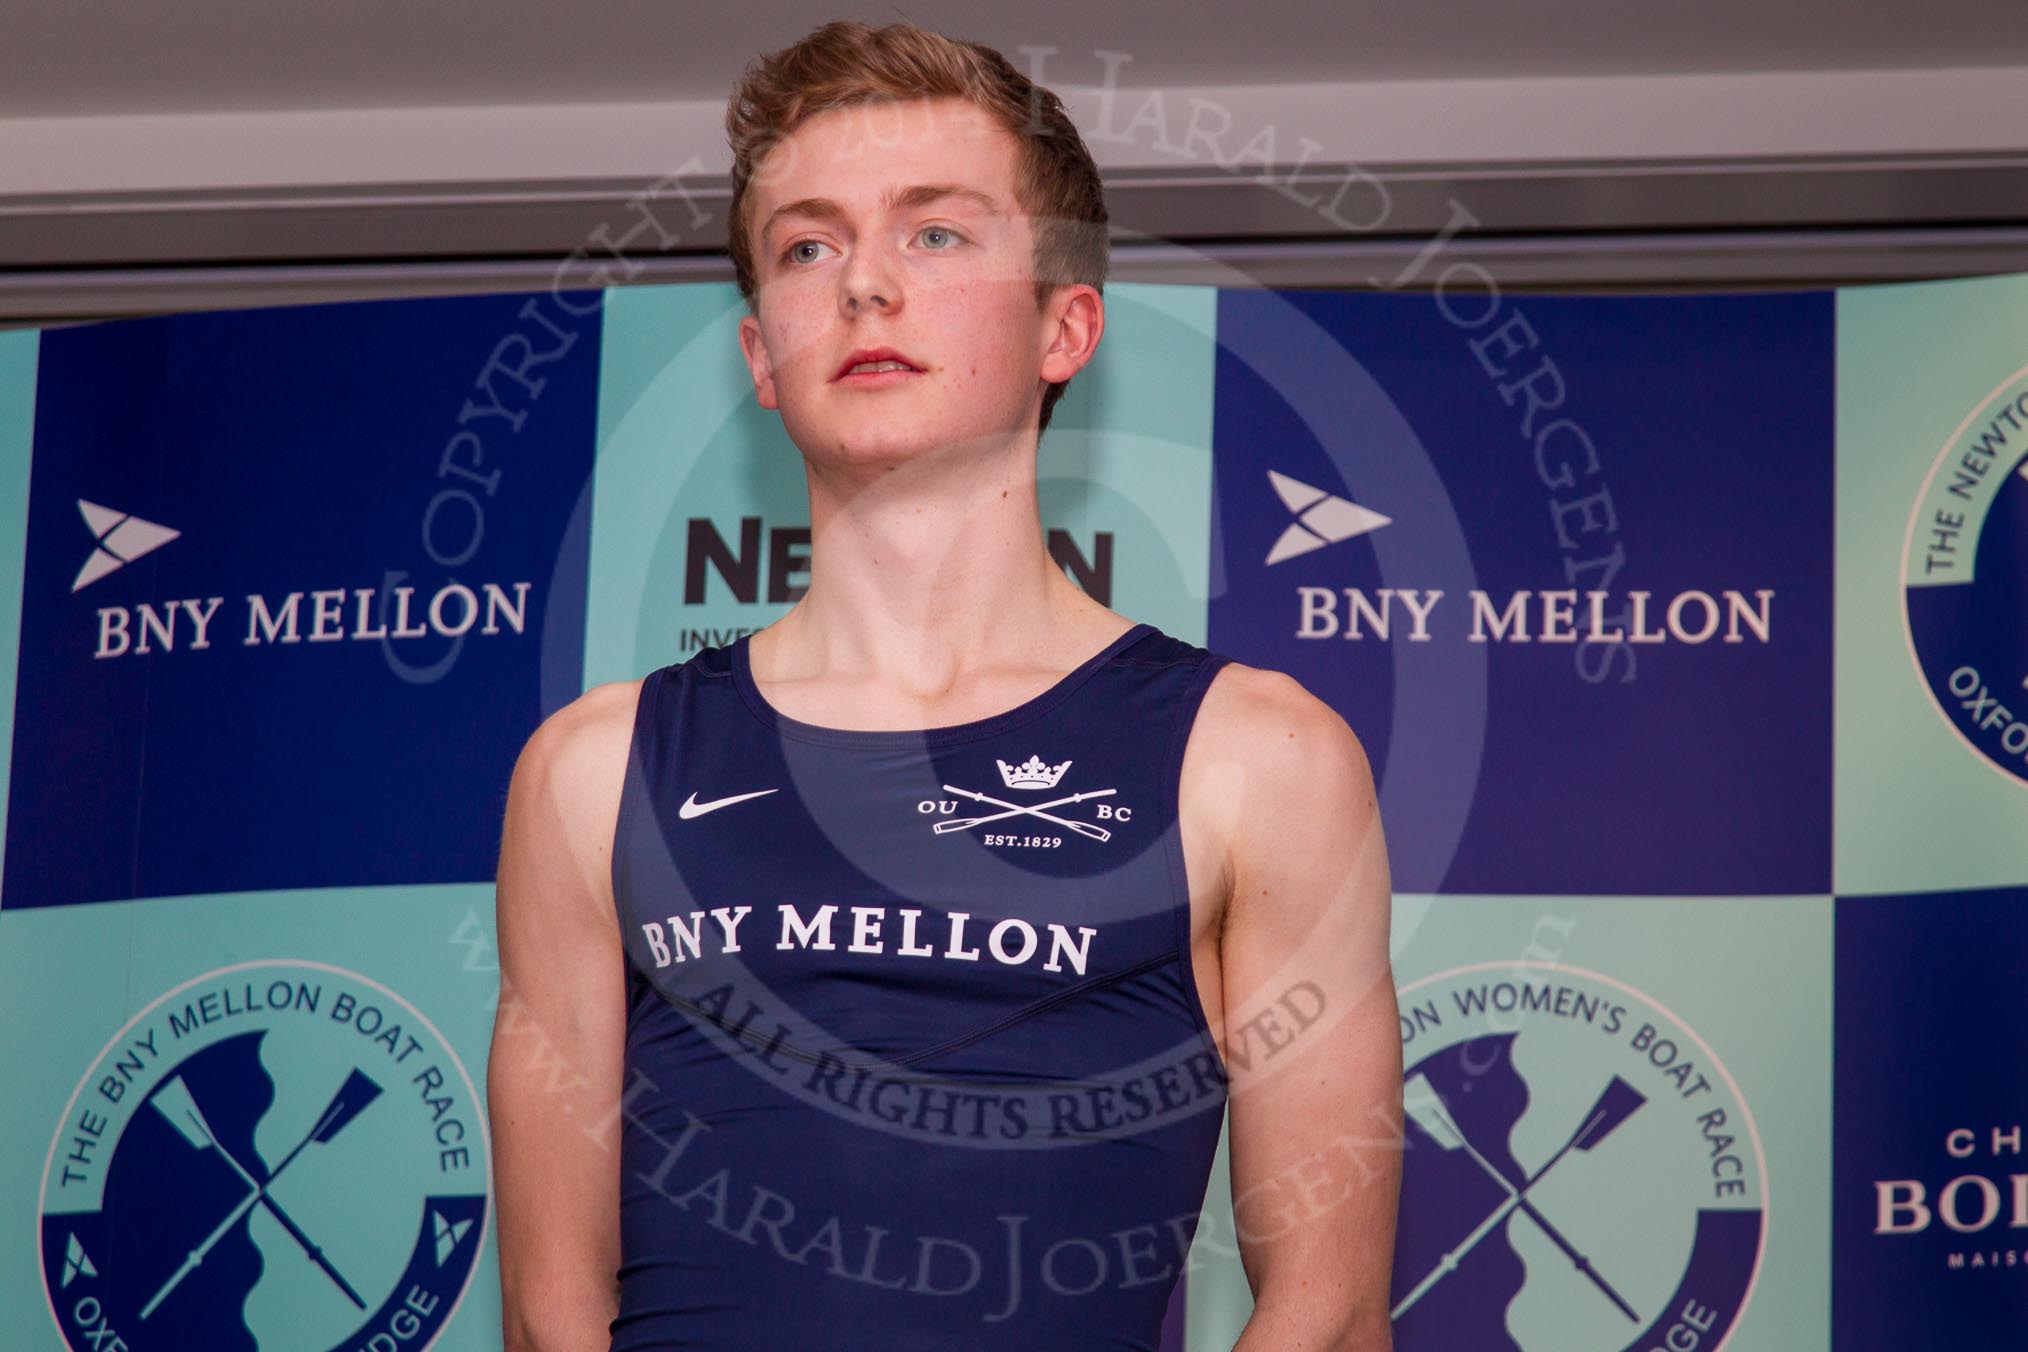 The Boat Race season 2014 - Crew Announcement and Weigh In: The 2014 Boat Race crews: Oxford cox Laurence Harvey 54.8kg..
BNY Mellon Centre,
London EC4V 4LA,
London,
United Kingdom,
on 10 March 2014 at 12:05, image #116